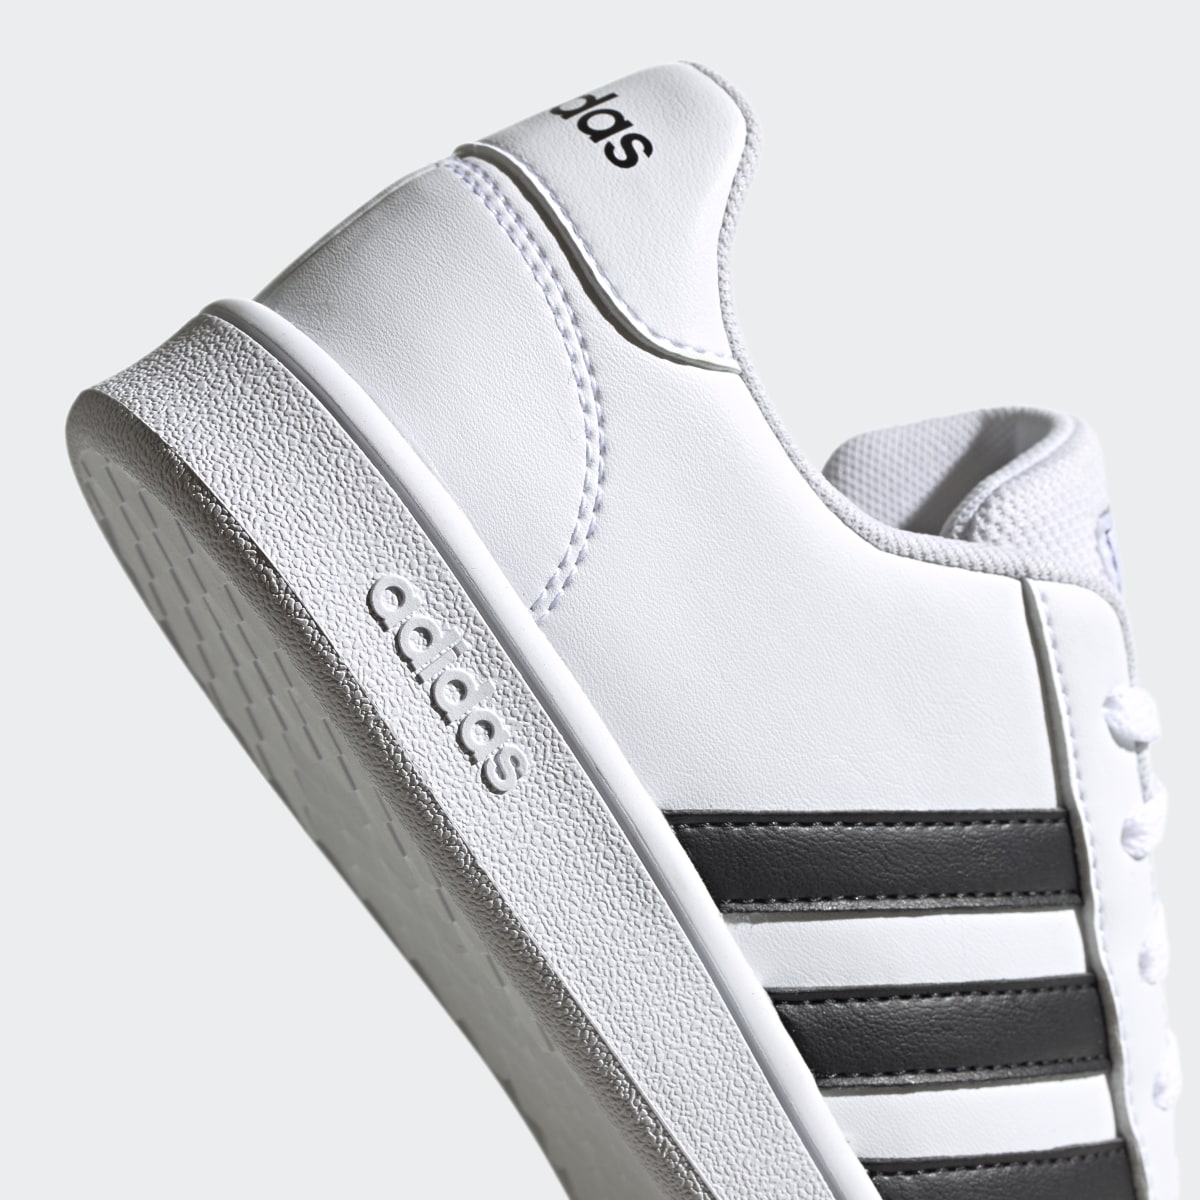 Adidas Grand Court Shoes. 11